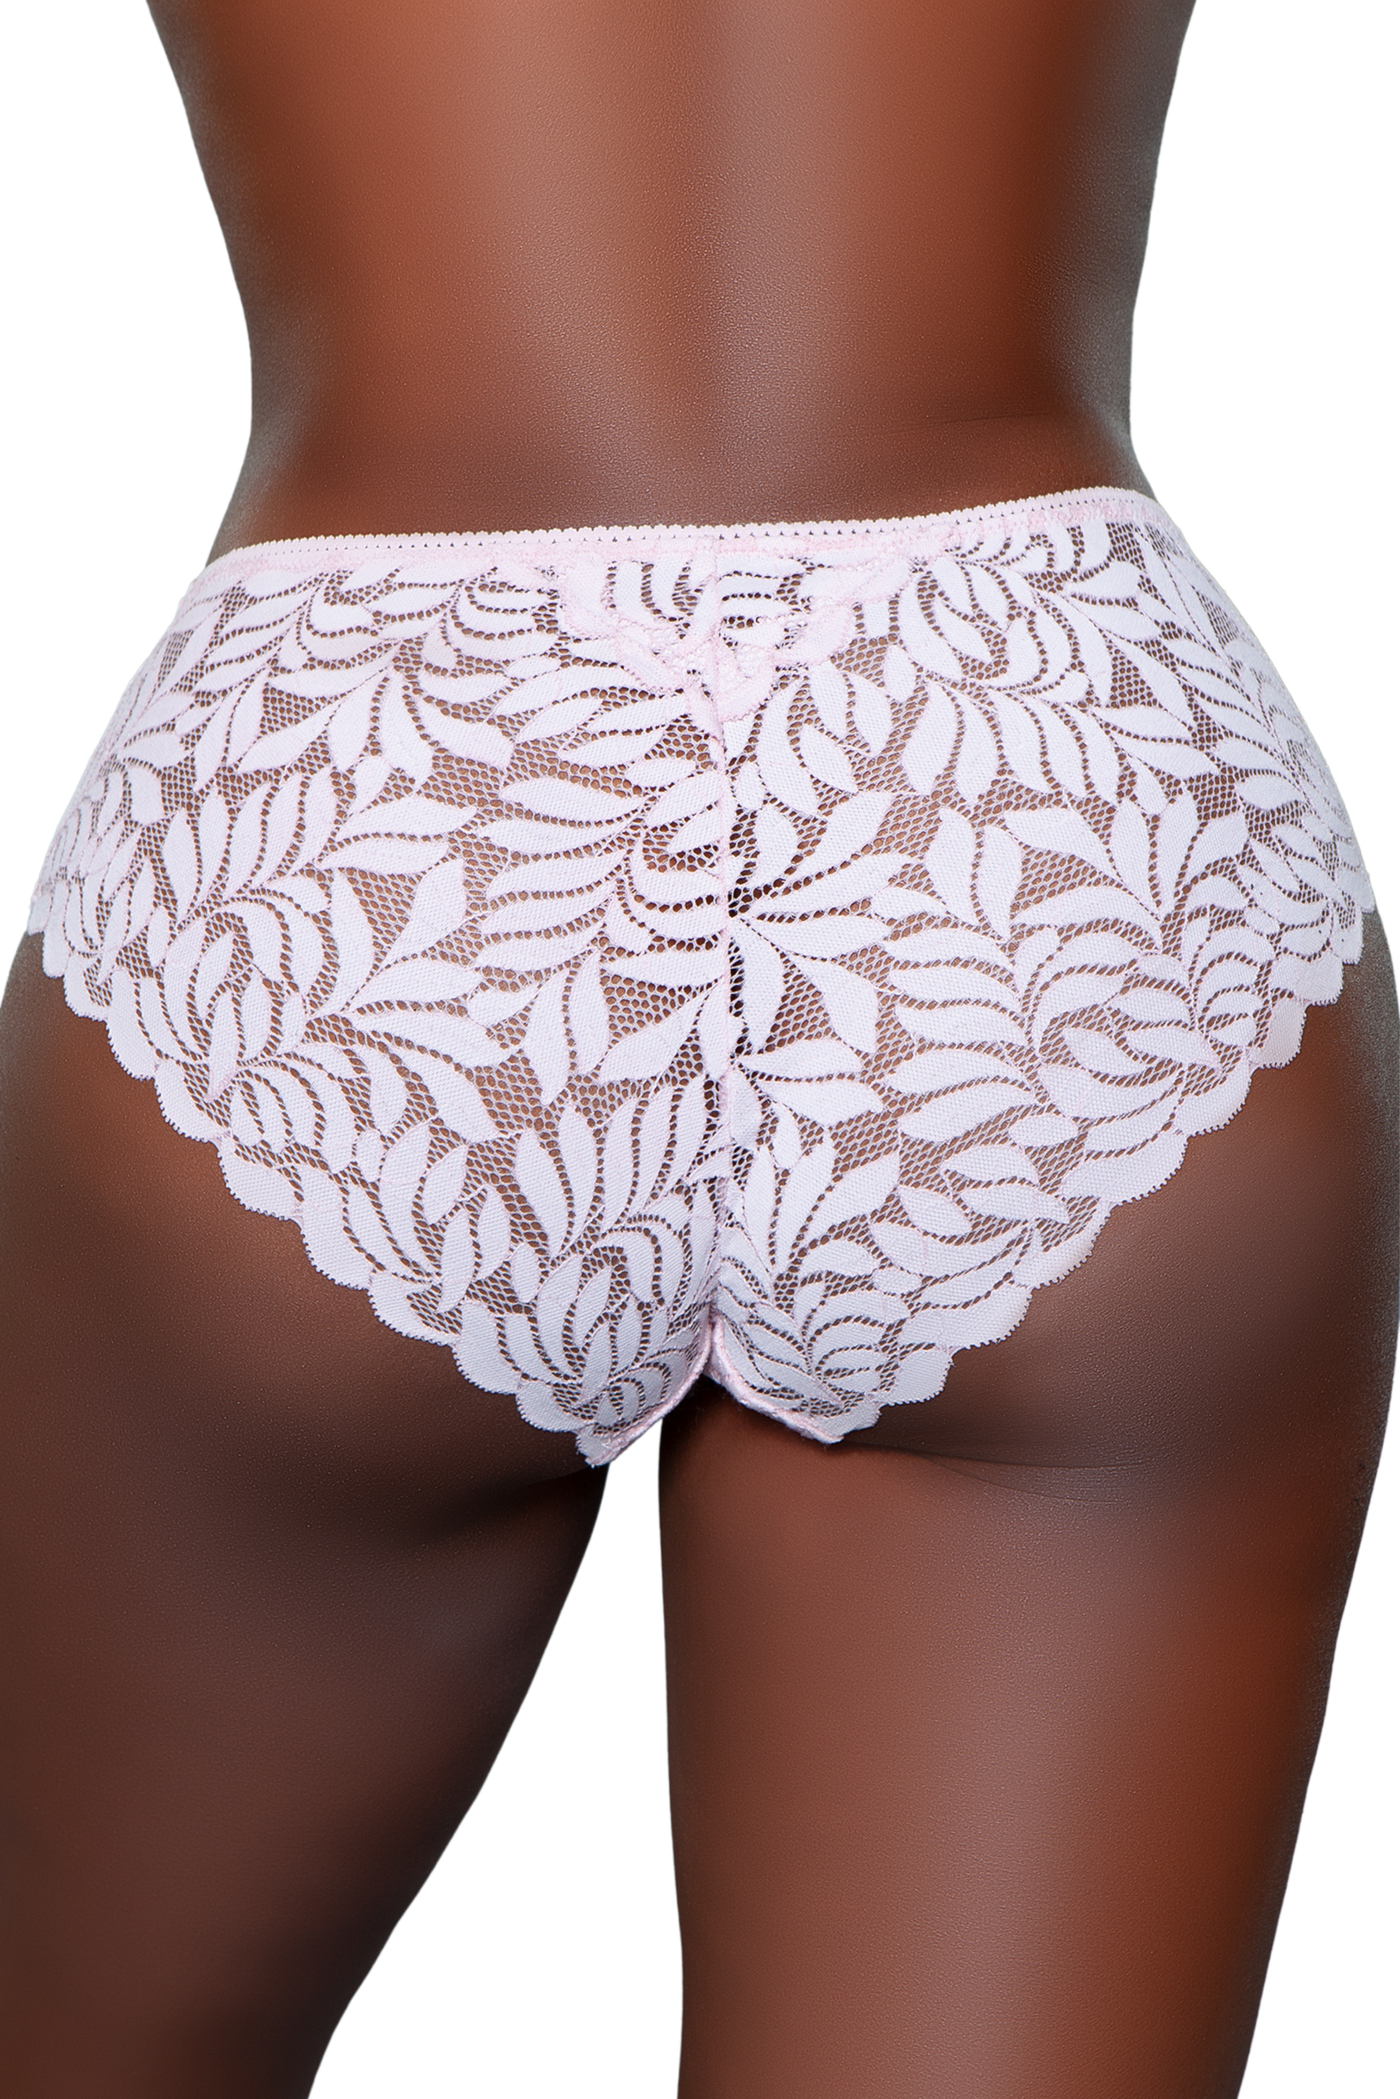 3pc. Mid-Rise Lace Hipster Panties - For Love of Lingerie